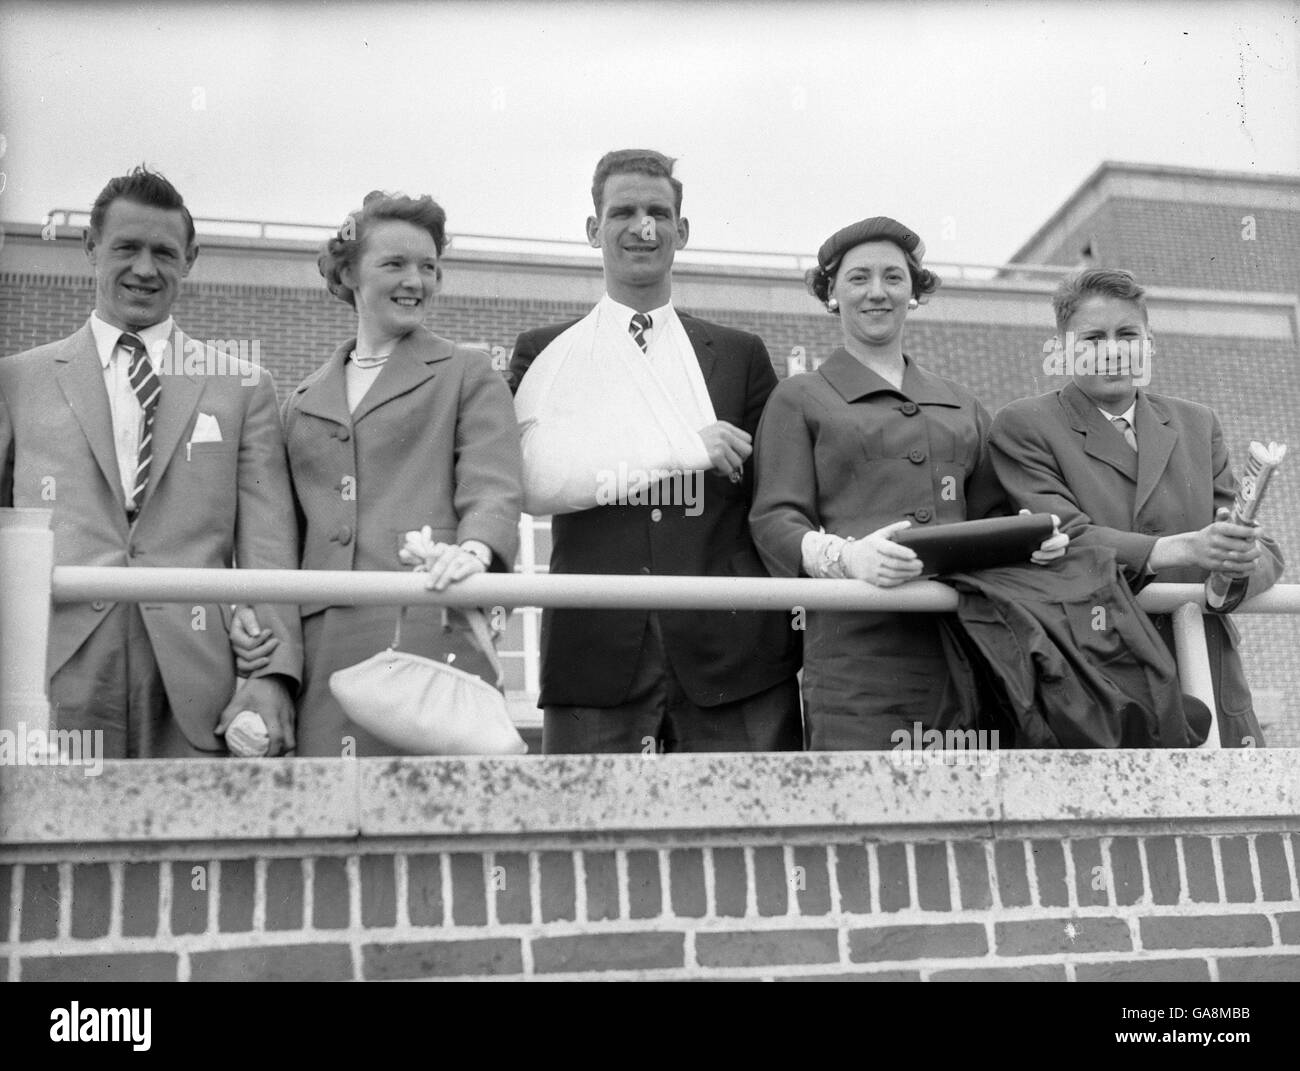 Jack Burkitt, captain of cup-winning Nottingham Forest, has his arm in a sling after getting injured during the cup final. Pictured with him (l-r) Billy Gray, Mrs Gray, Mrs Burkitt and his Roger Burkitt. The Triumphant Nottingham Forest team had a day at the seaside before returning to Nottingham. Stock Photo